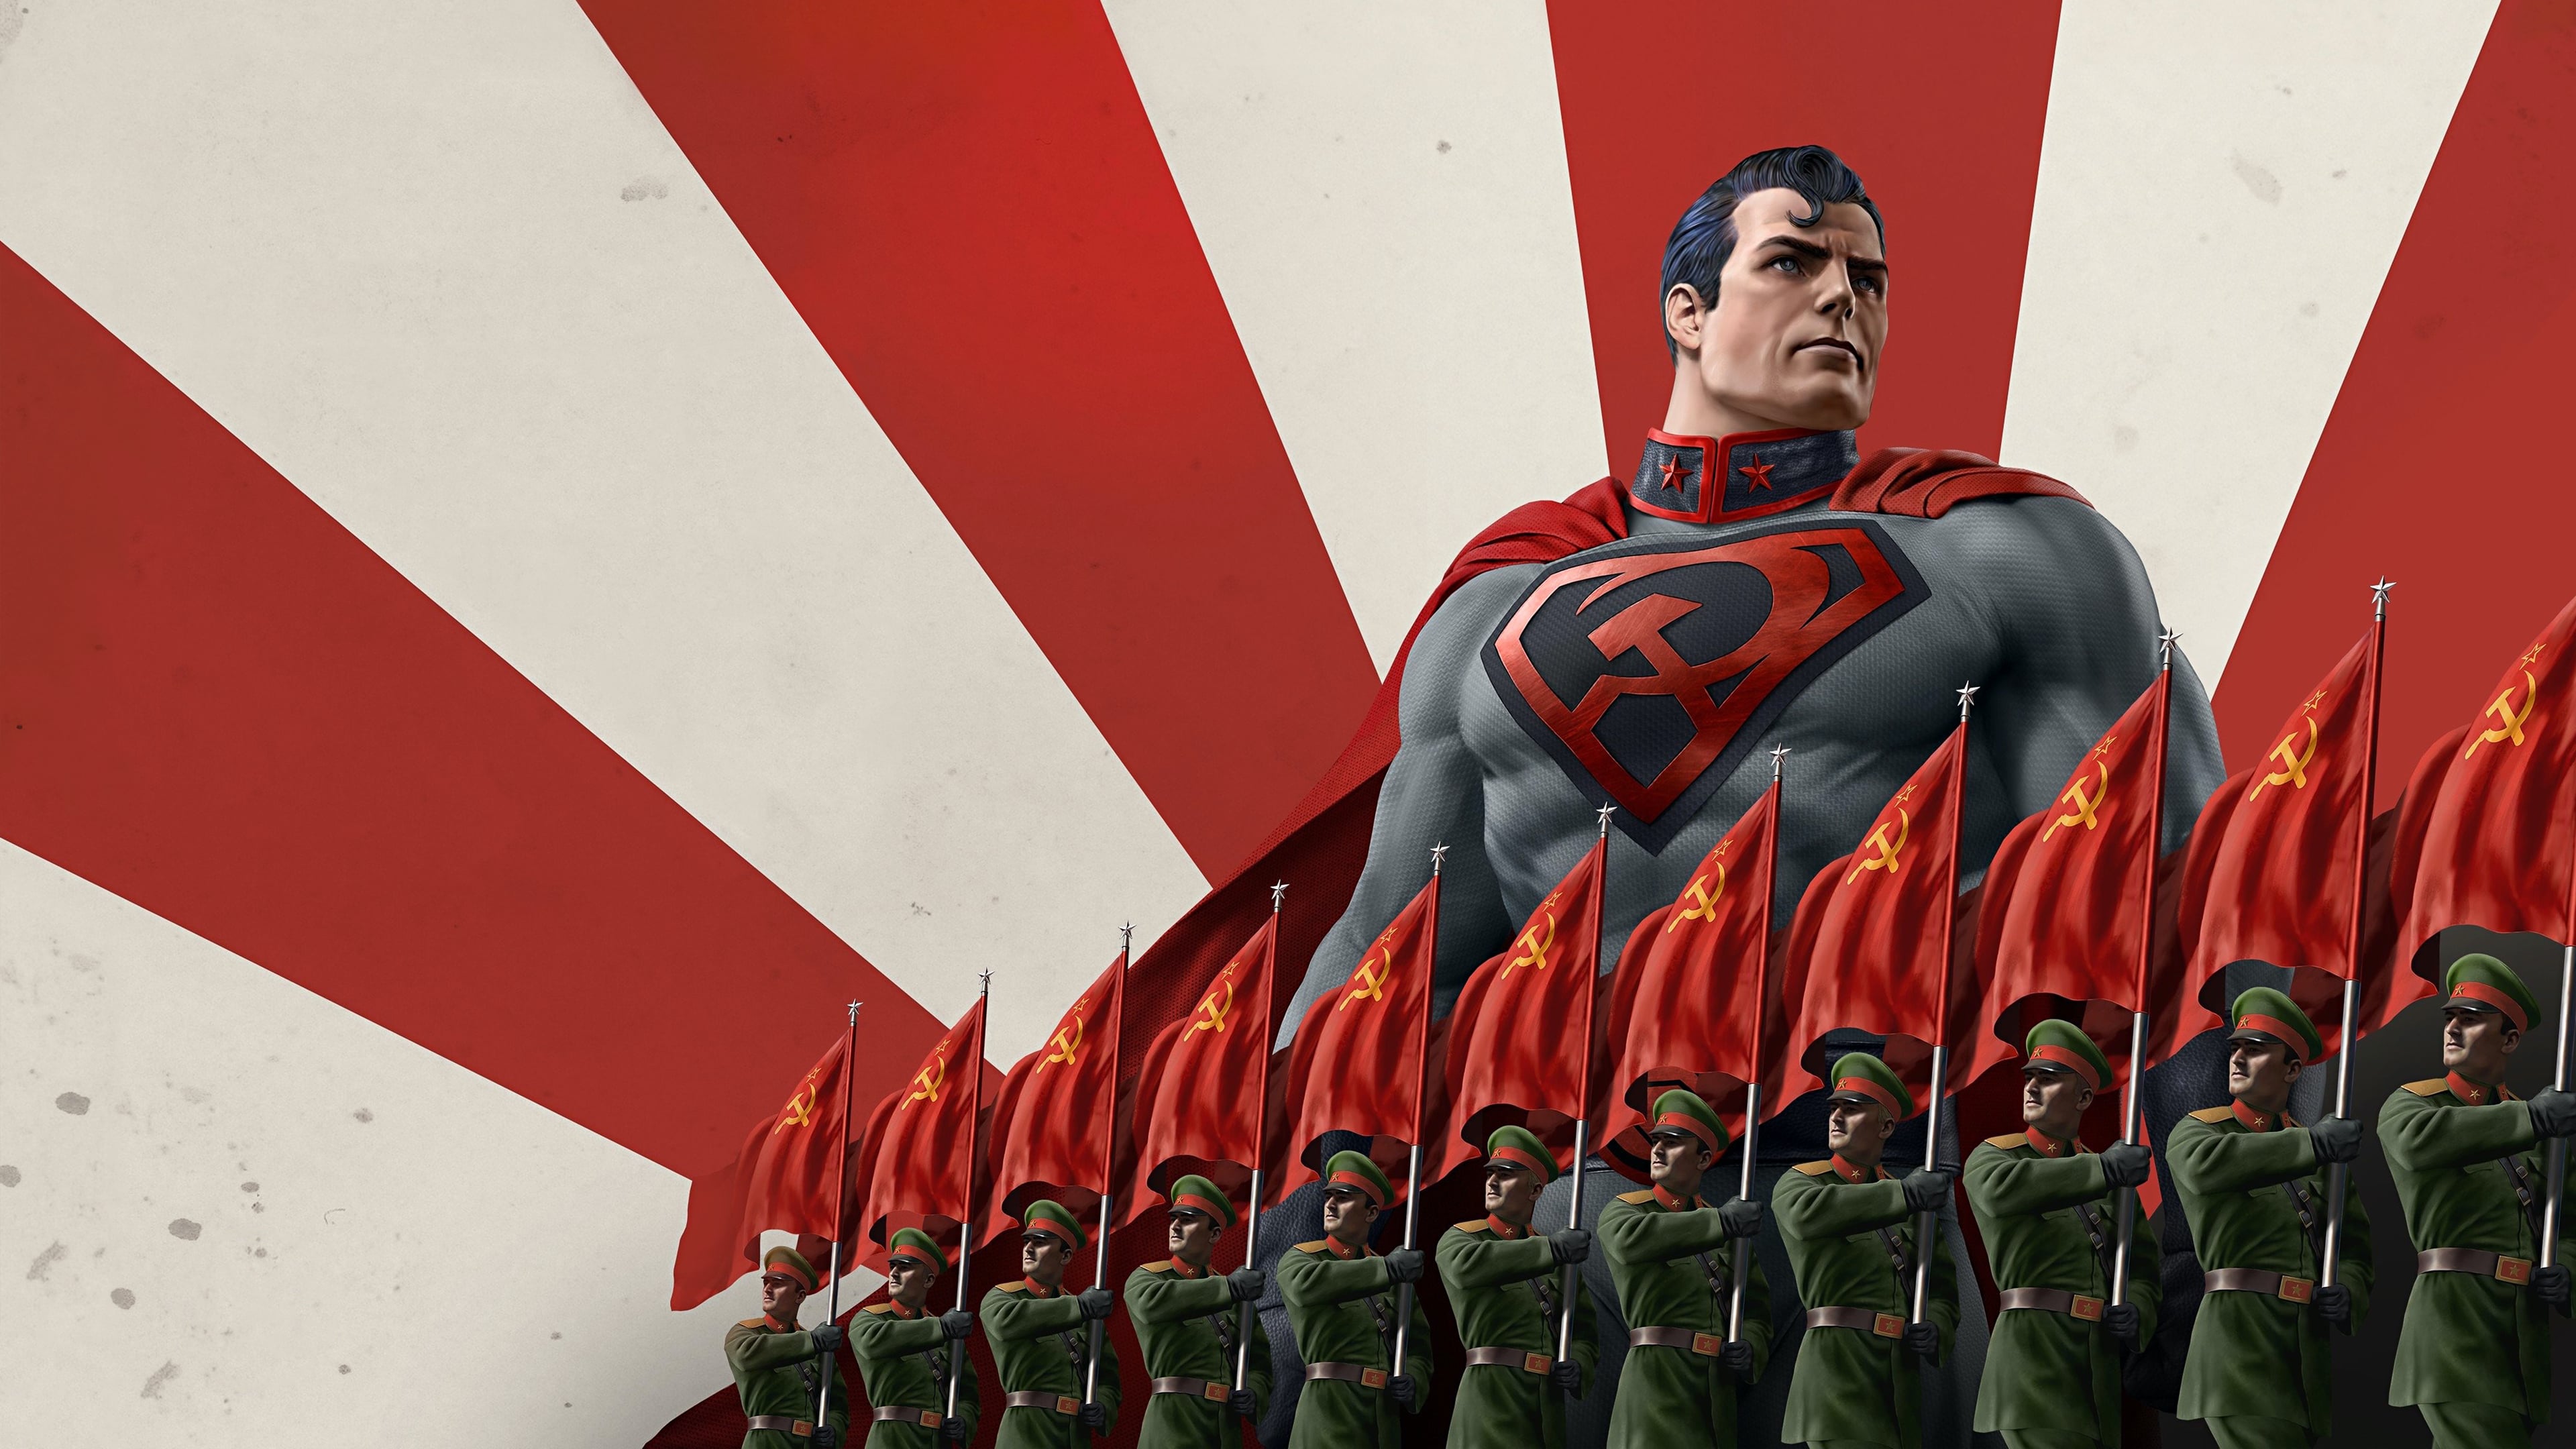 Superman Red son 2020